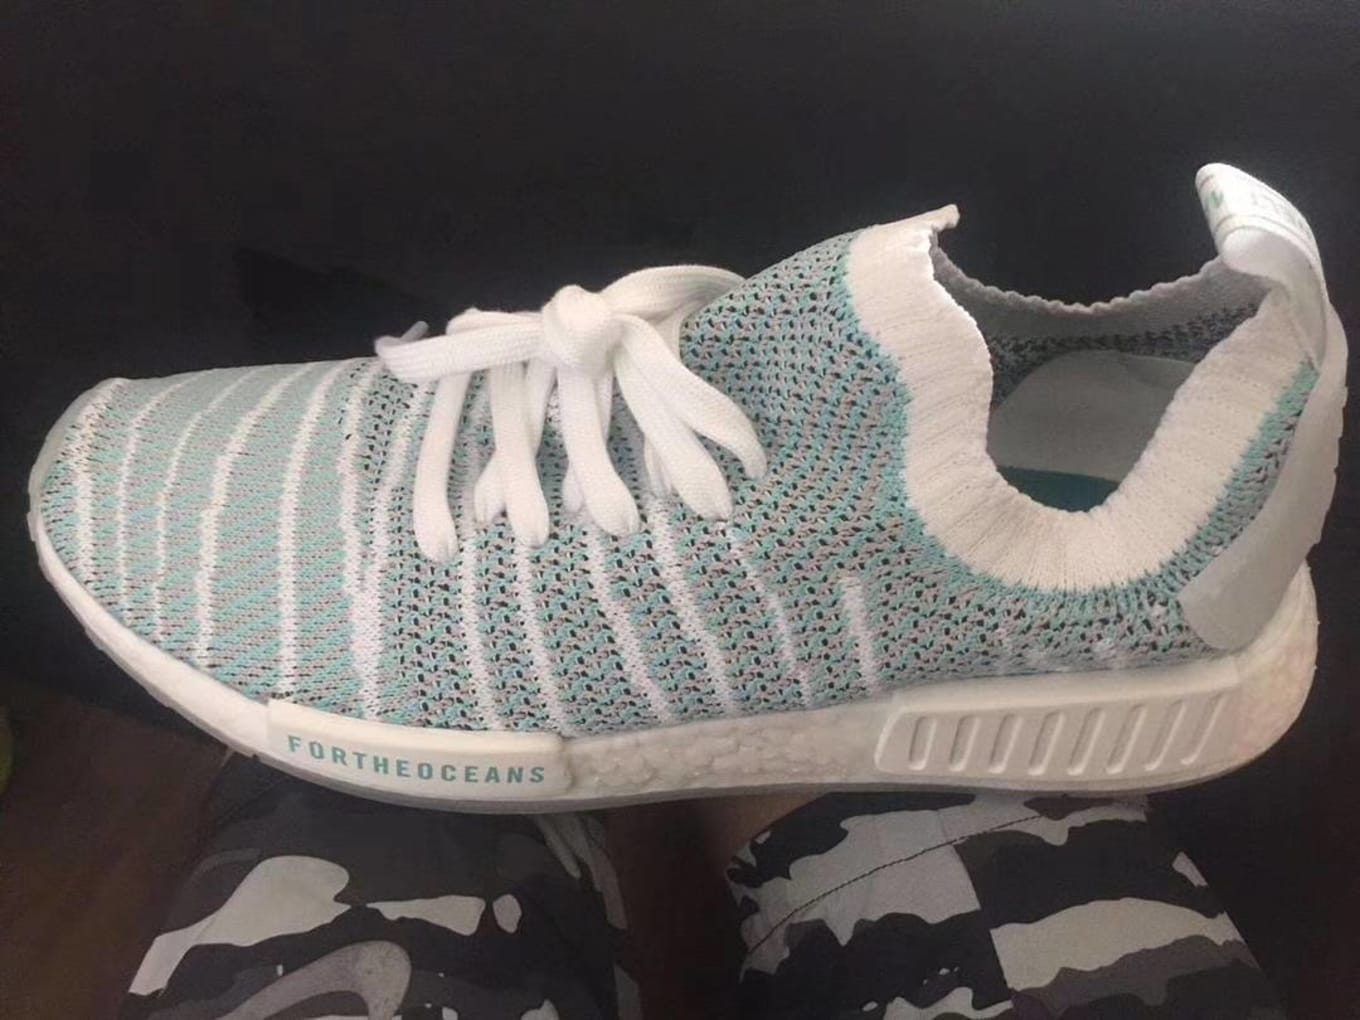 nmd x parley